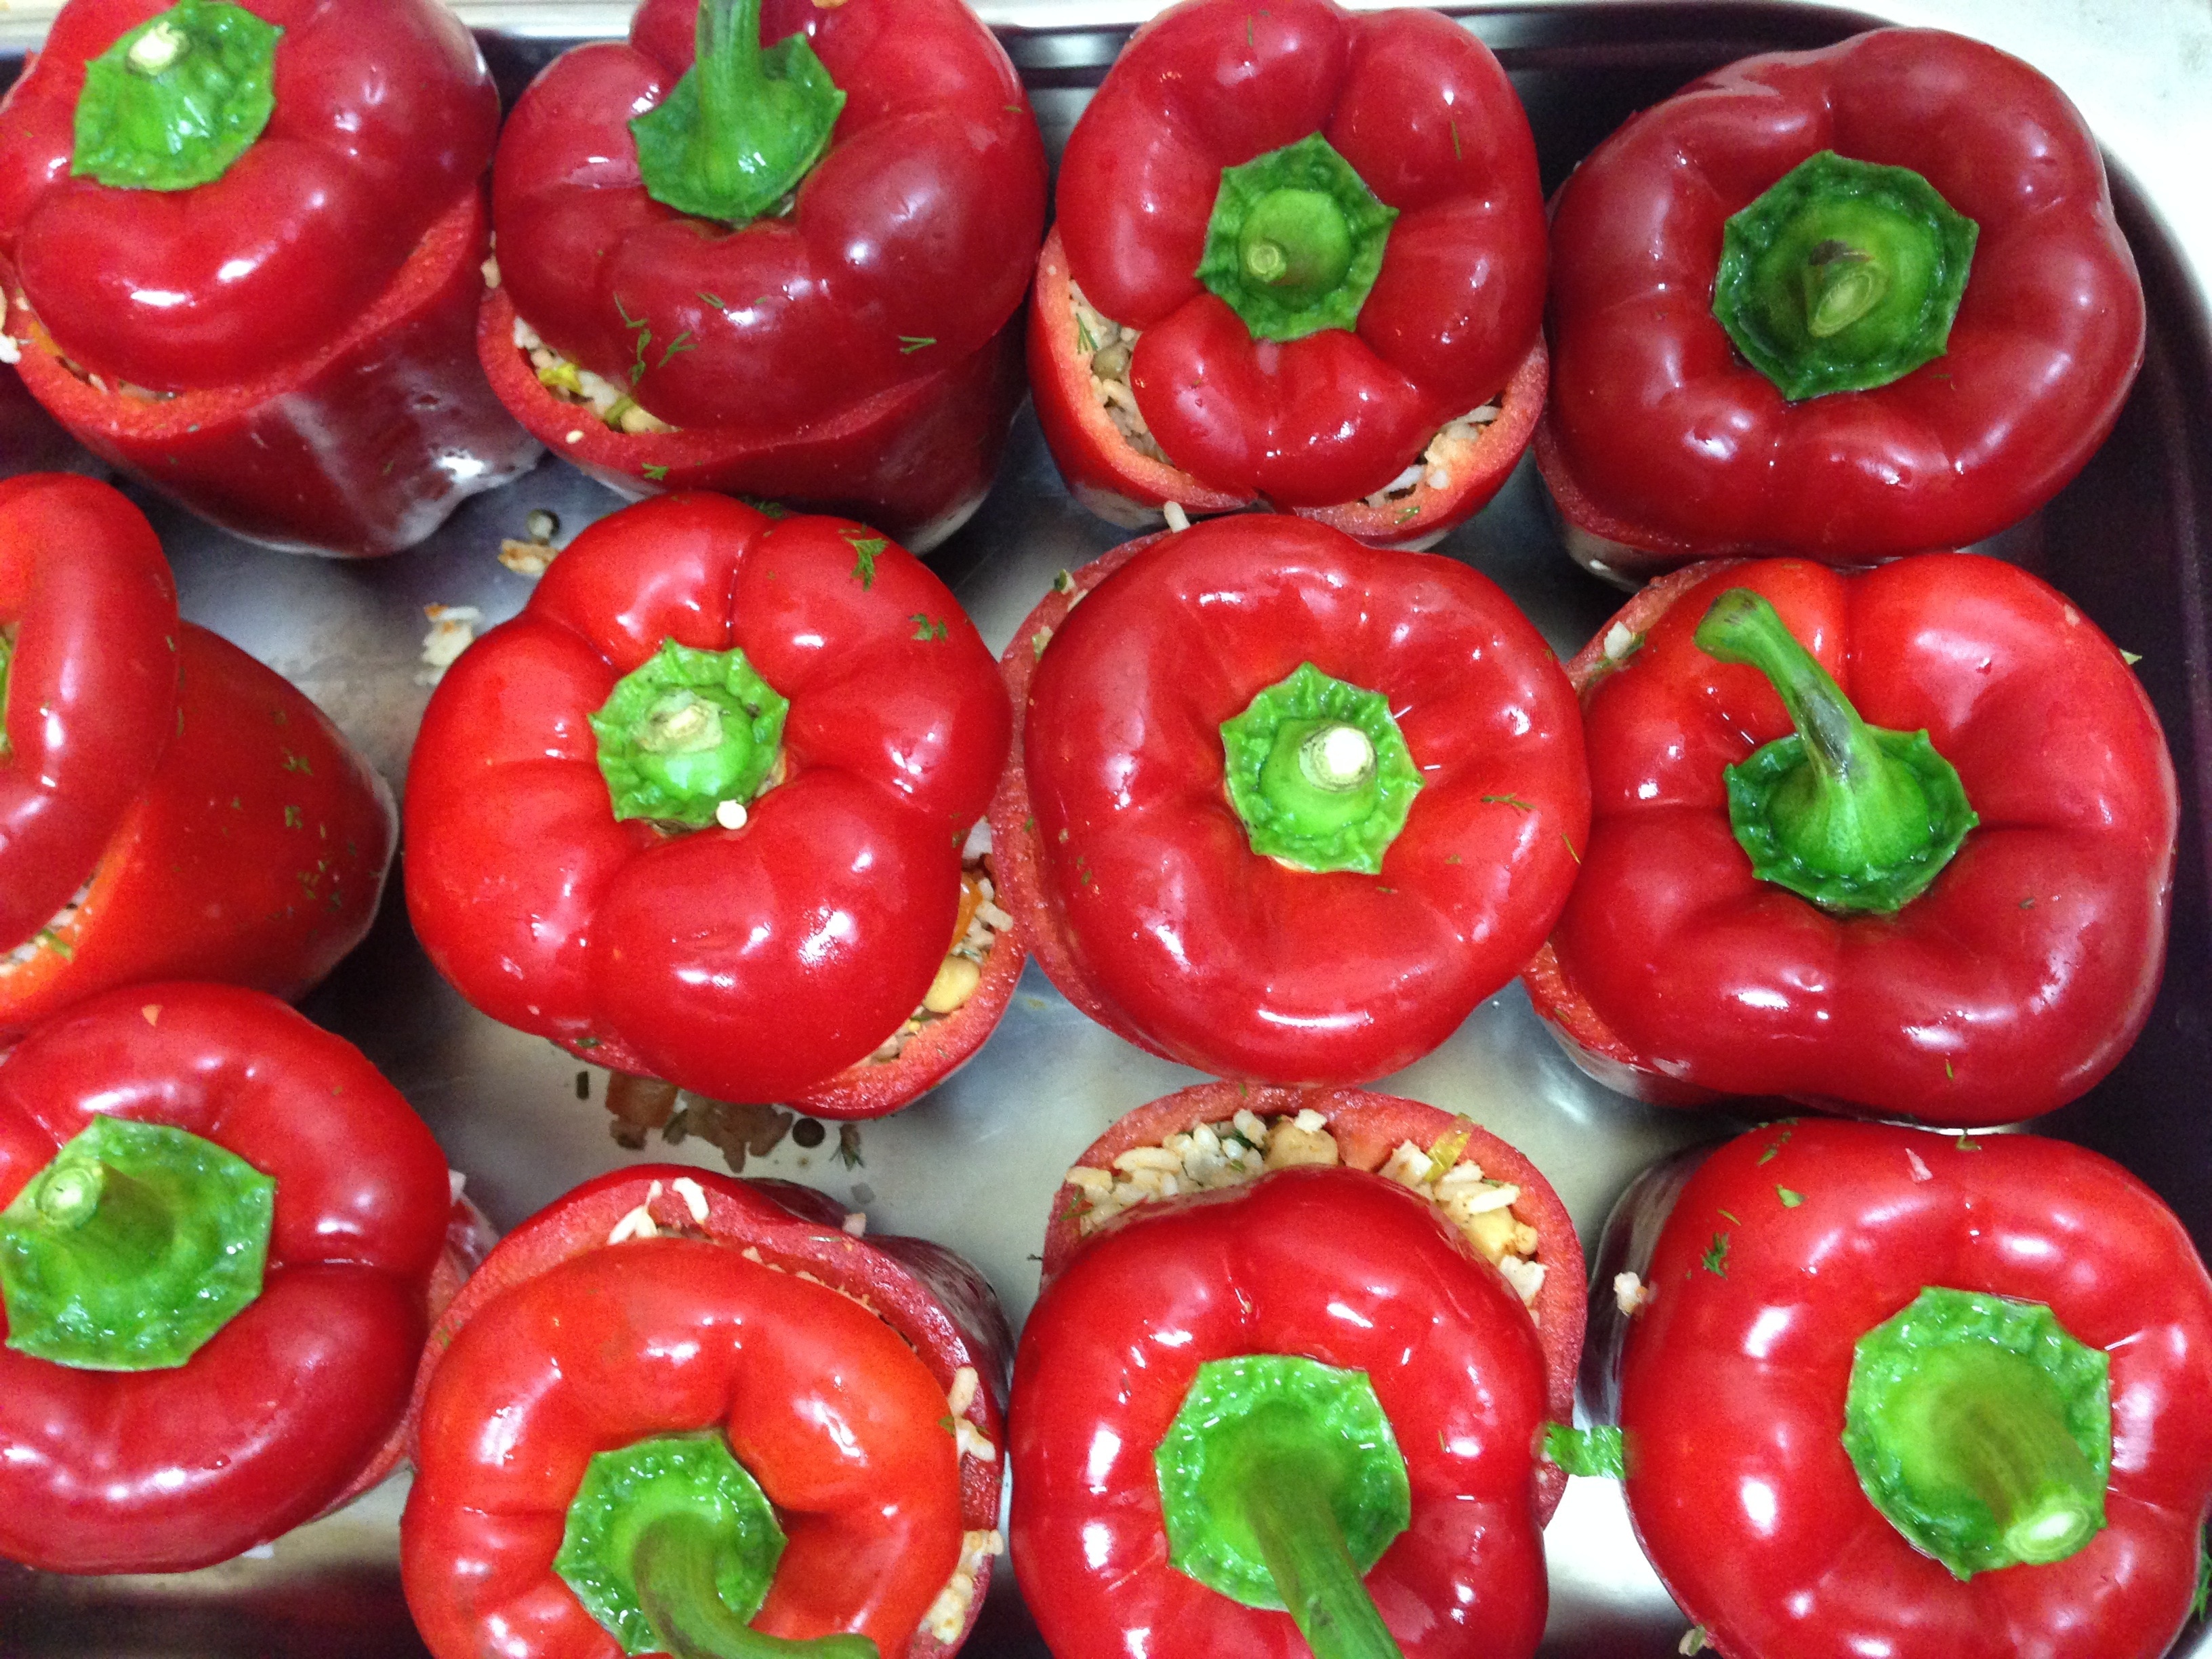 12 red bell peppers